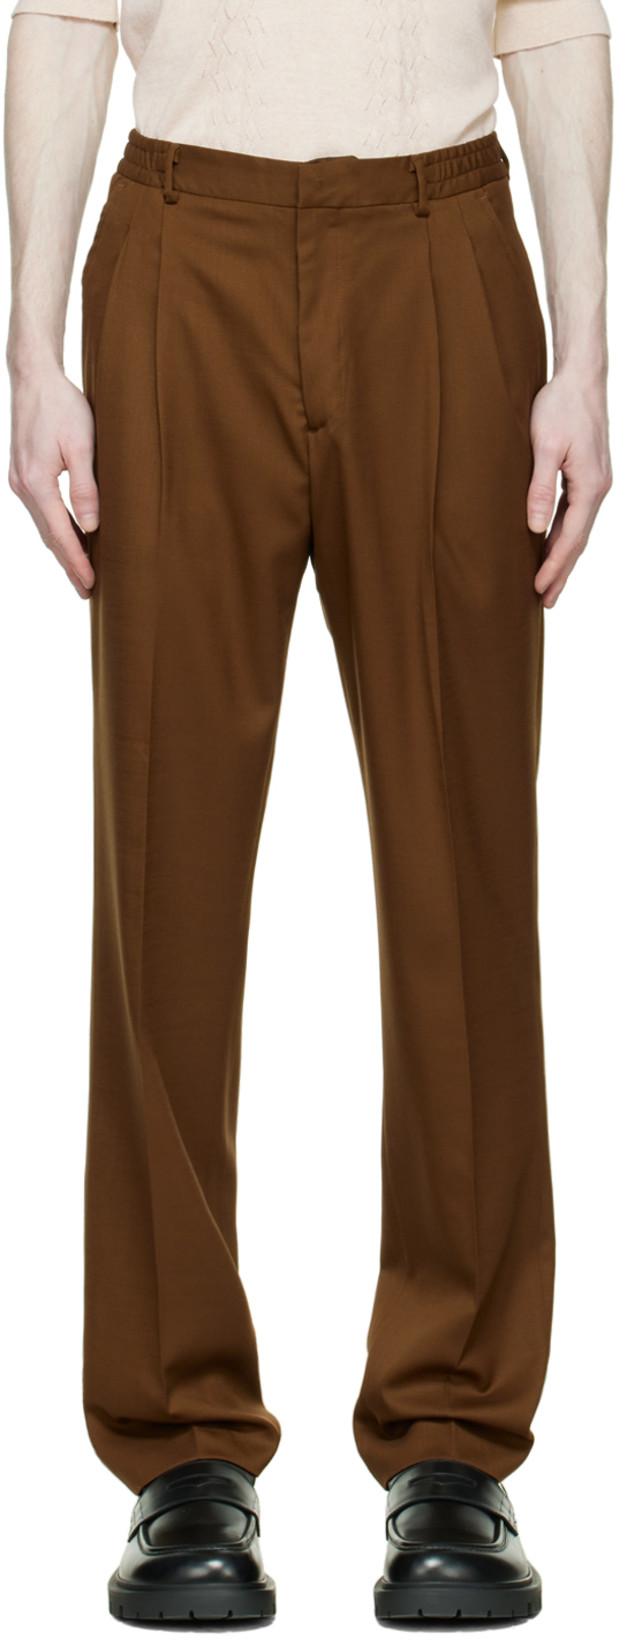 SSENSE Exclusive Brown Trousers by CMMN SWDN